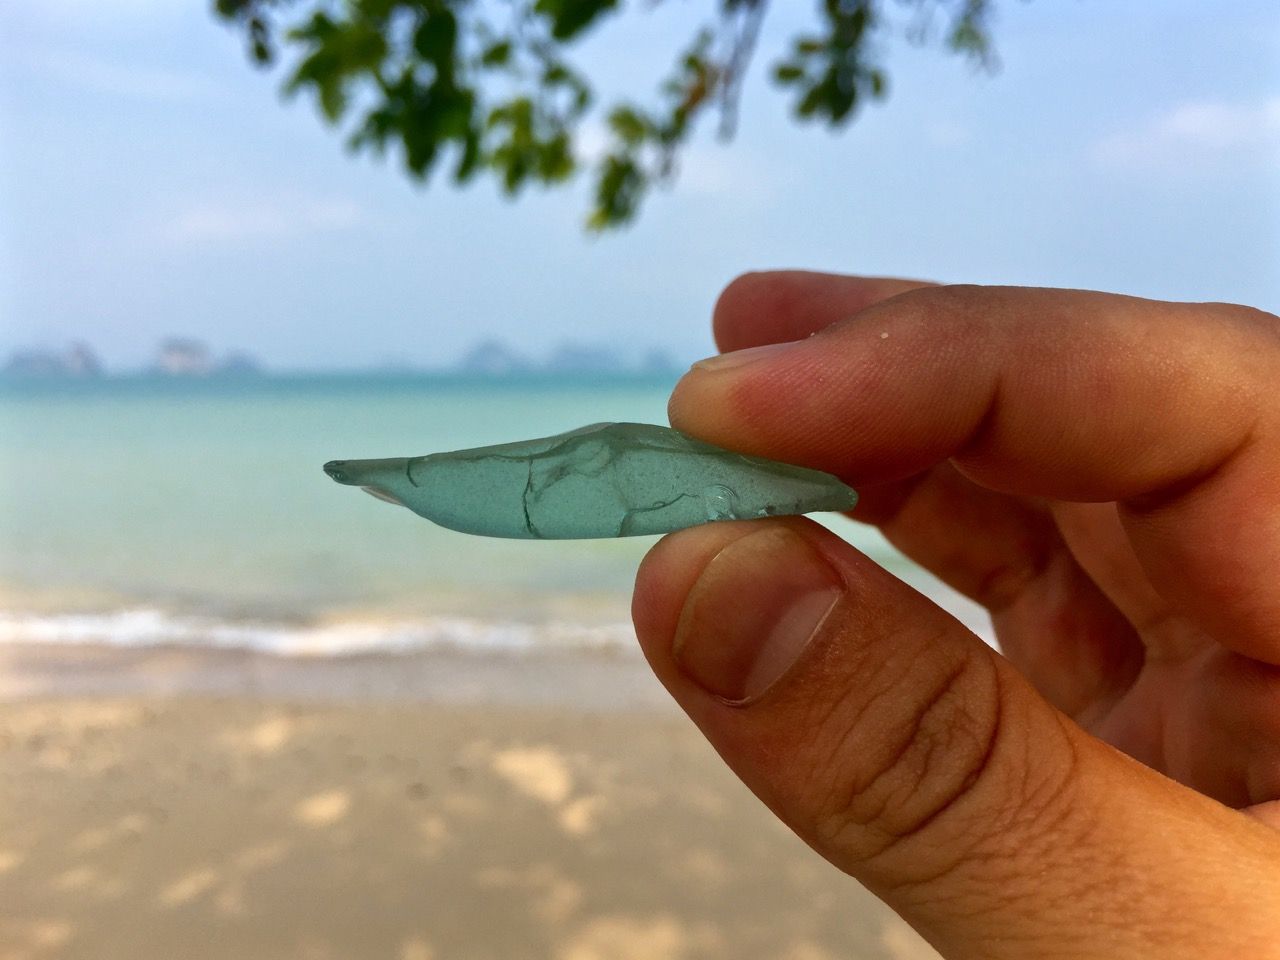 Sea glass whose color matches the ocean in the background.